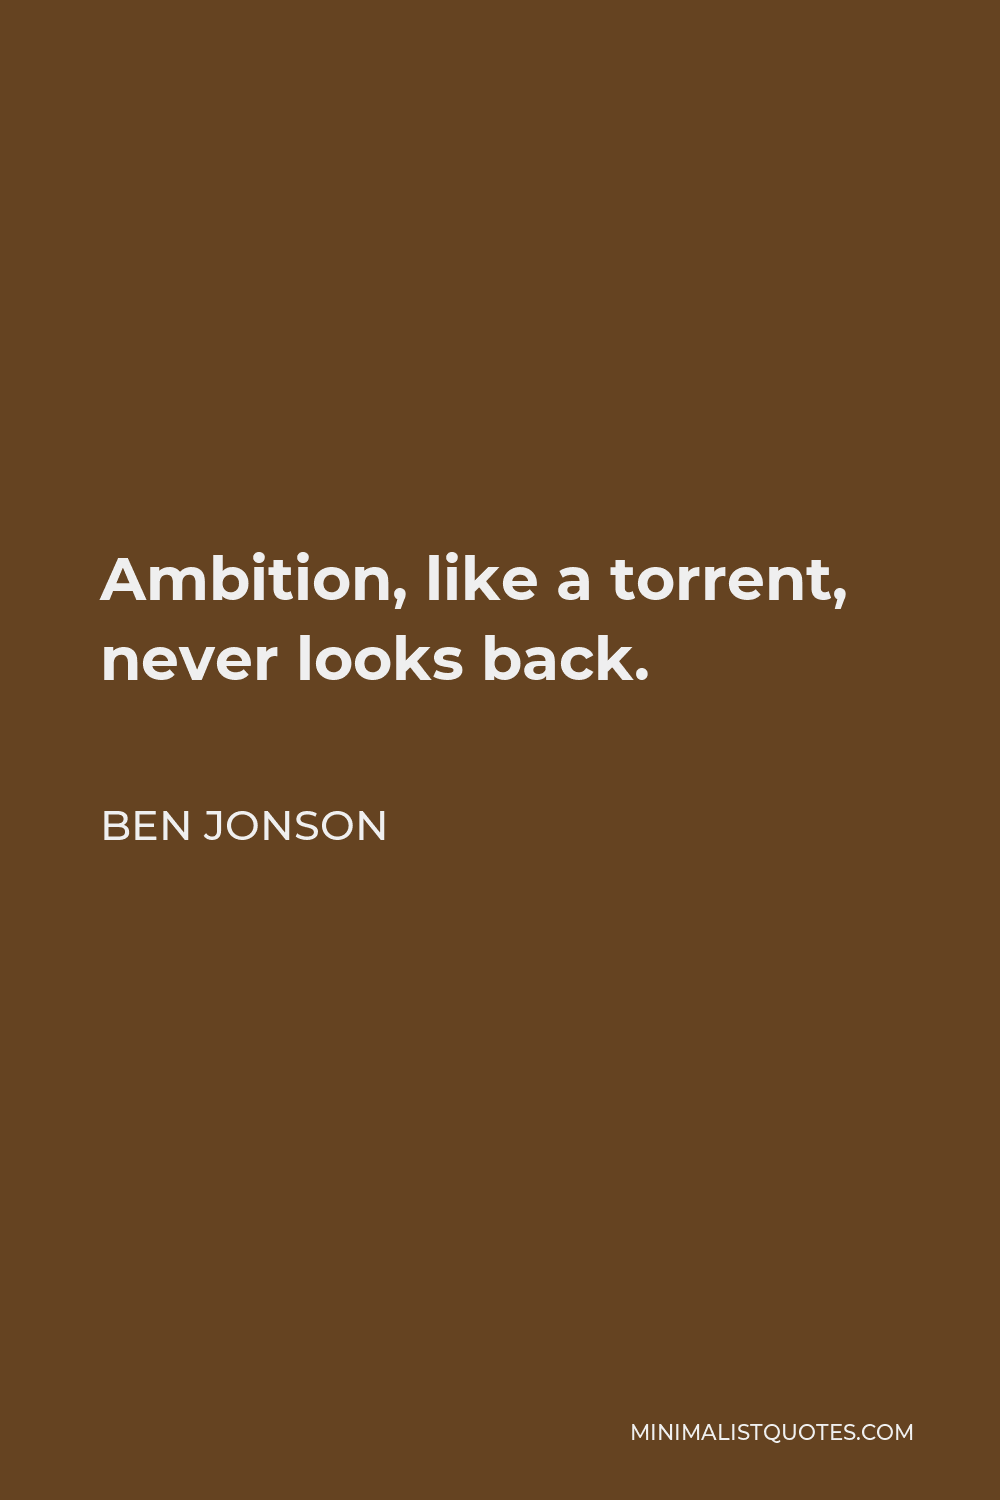 Ben Jonson Quote - Ambition, like a torrent, never looks back.